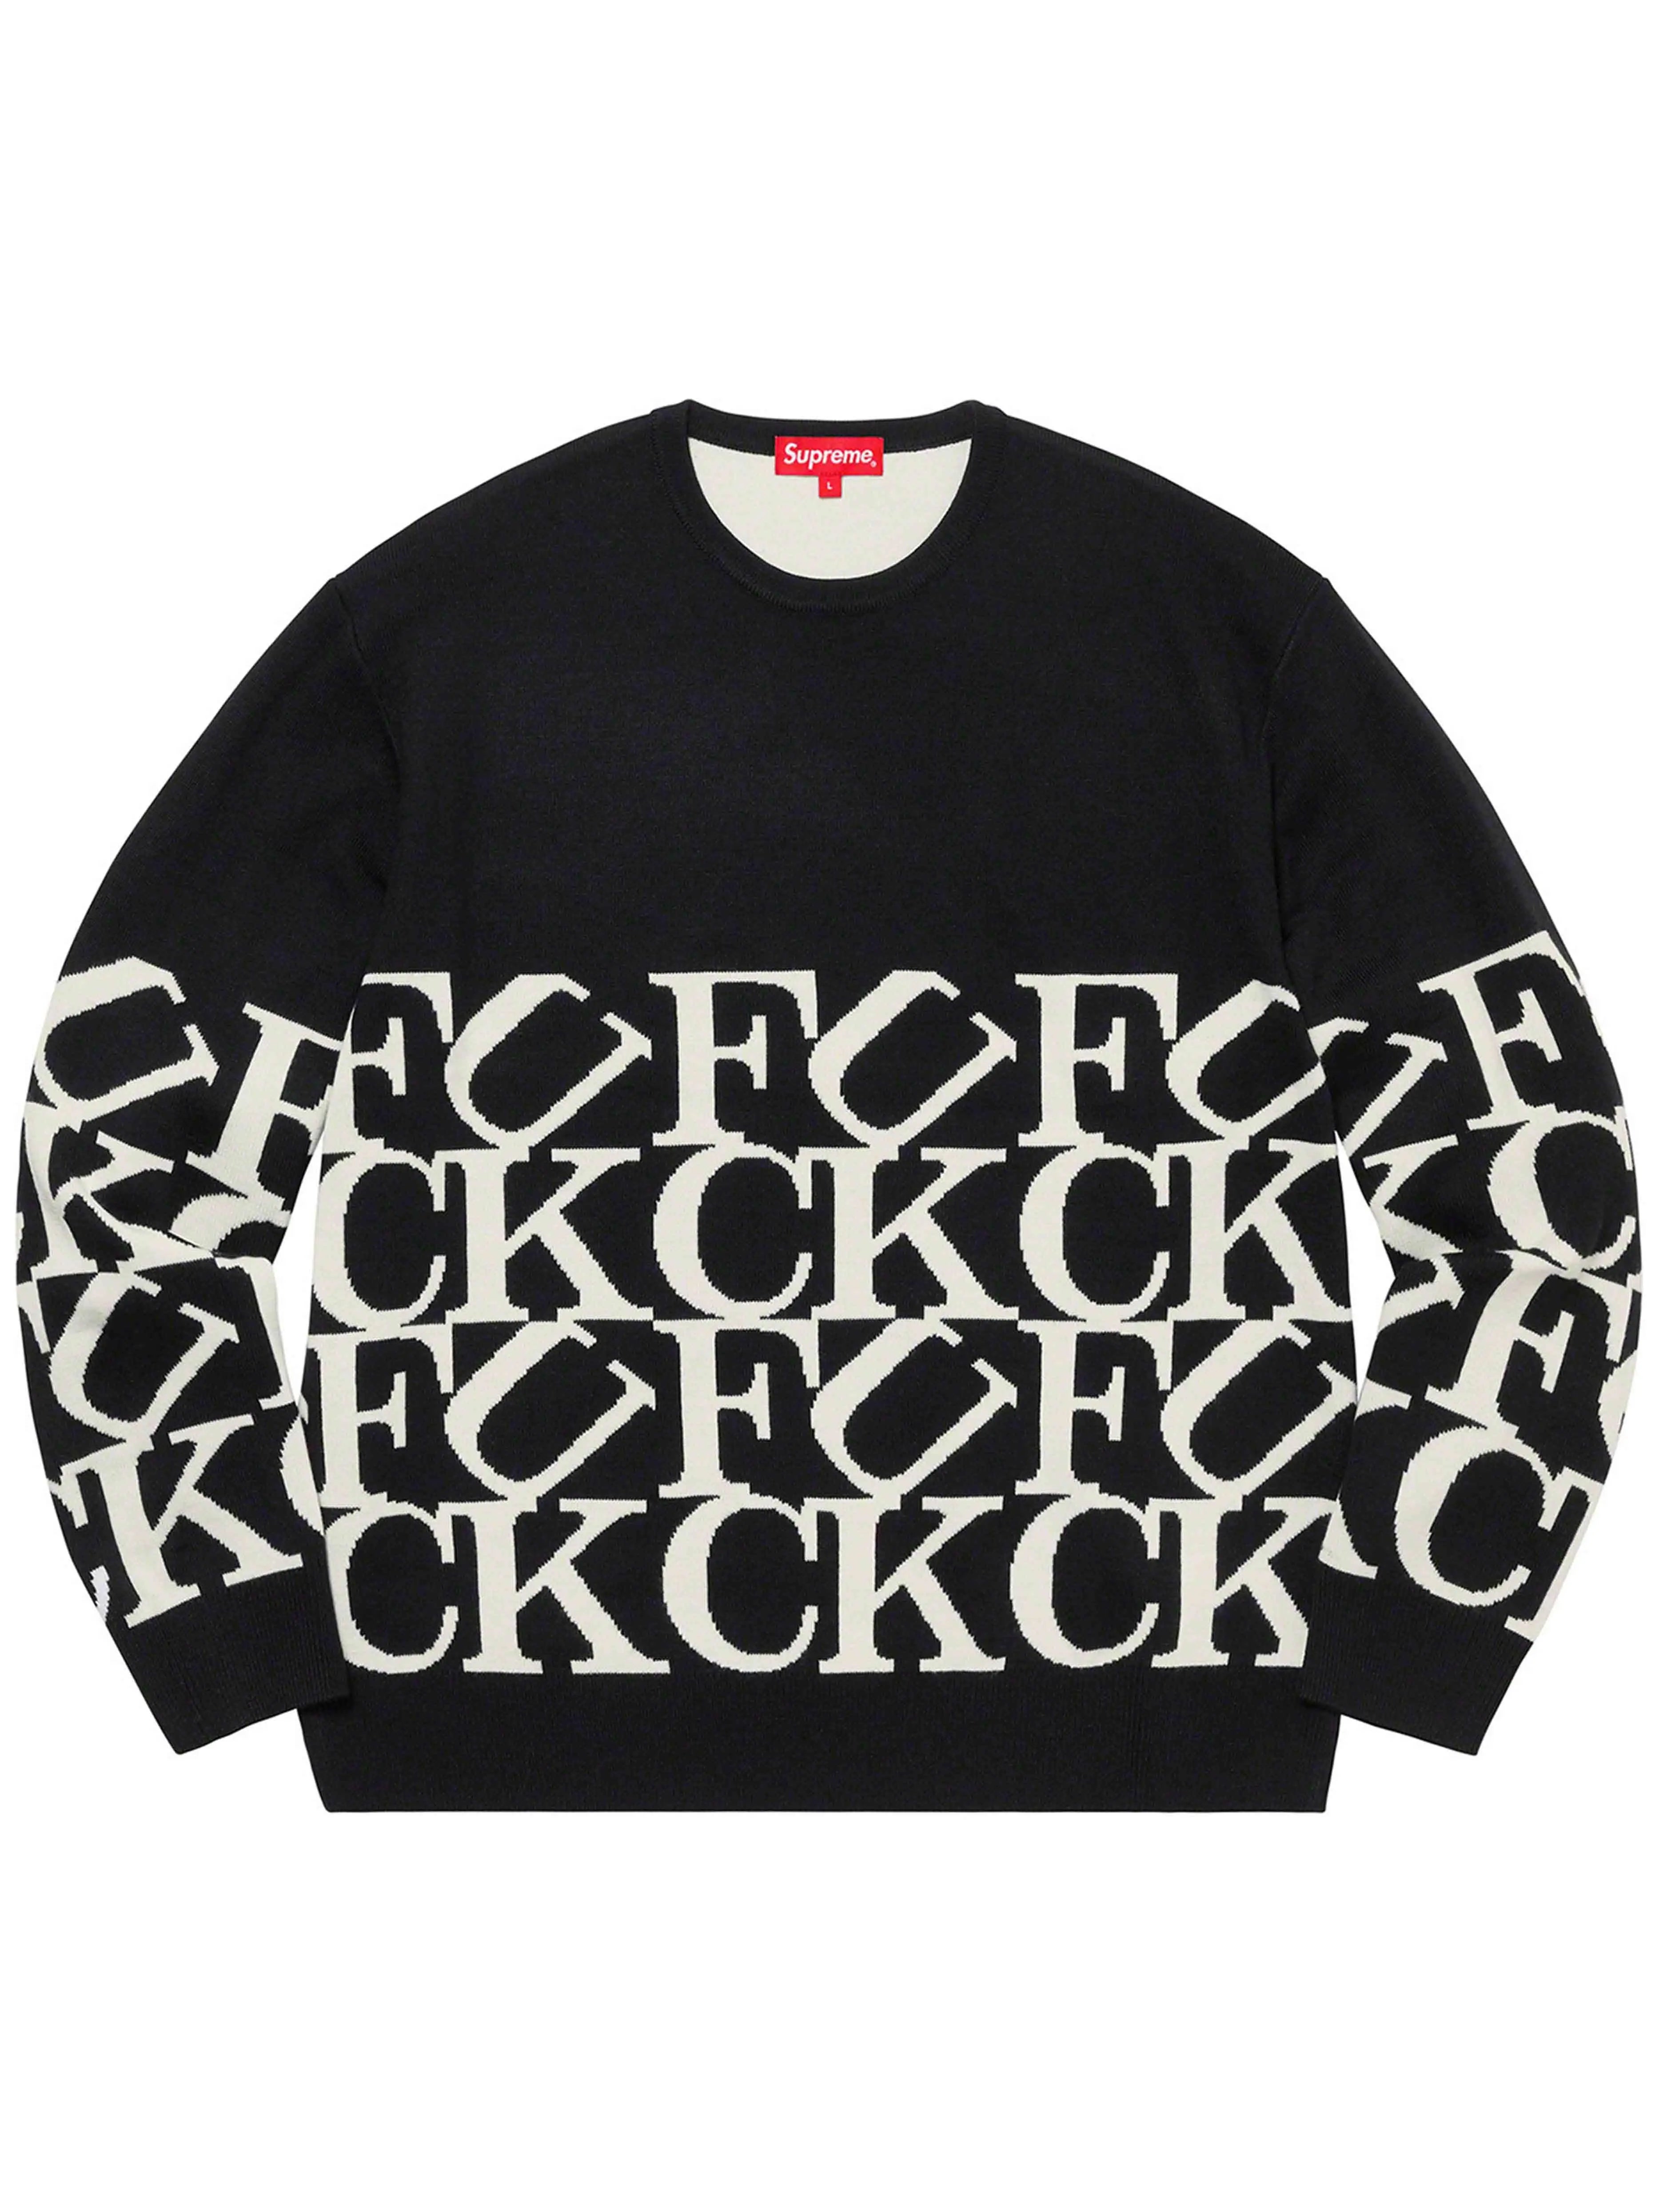 Supreme Fuck Sweater Black [FW20] in Auckland, New Zealand - Prior